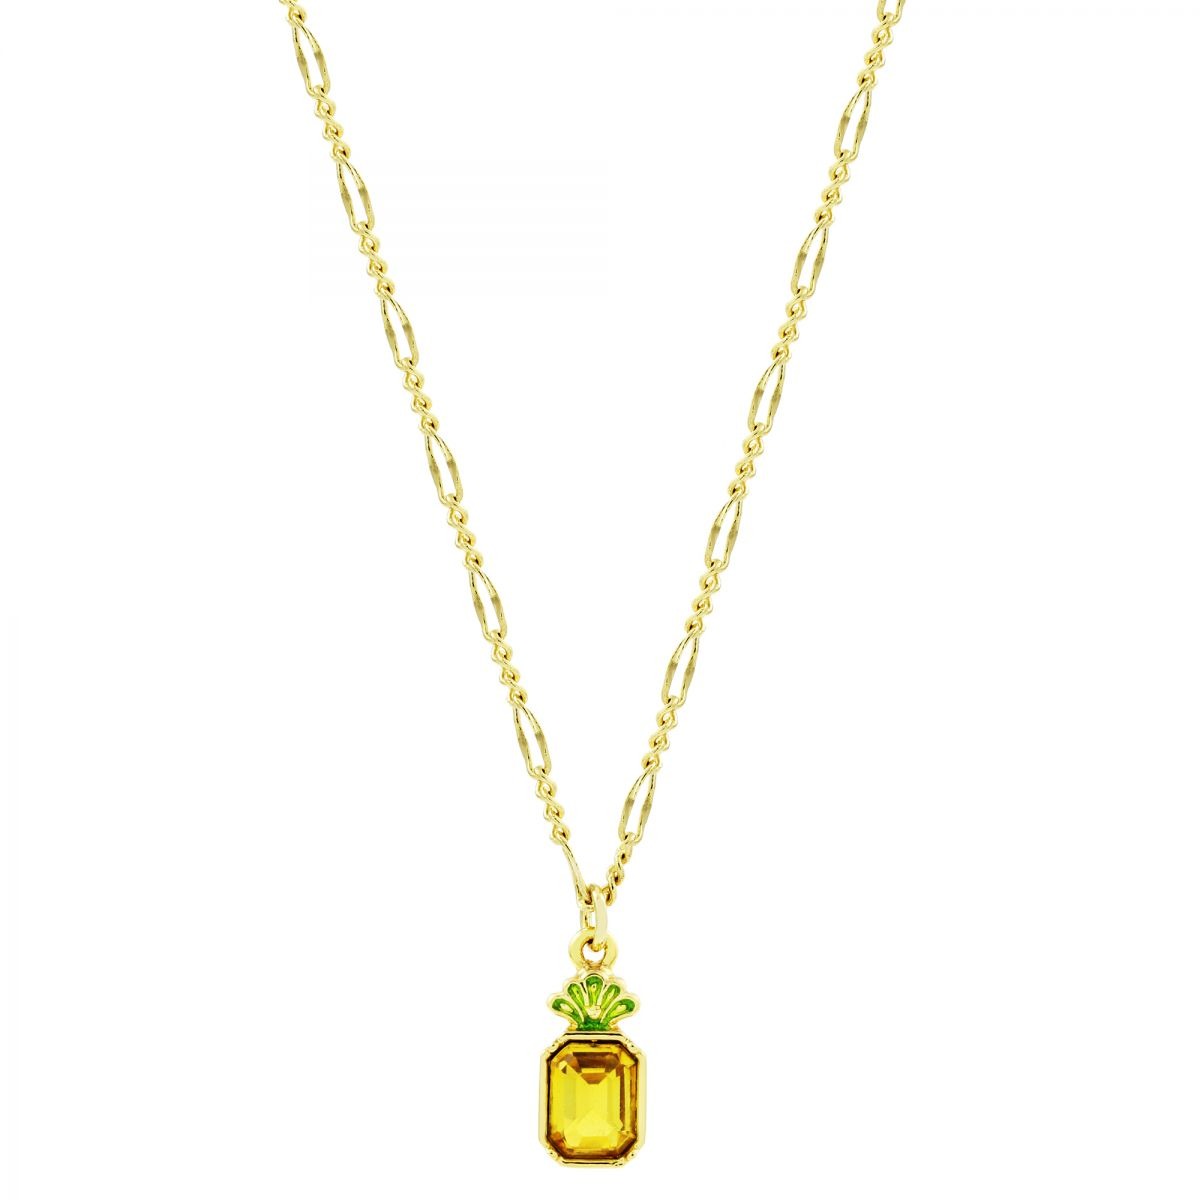 Watch Shop - Necklace Yellow Juicy Couture Woman GOOFASH